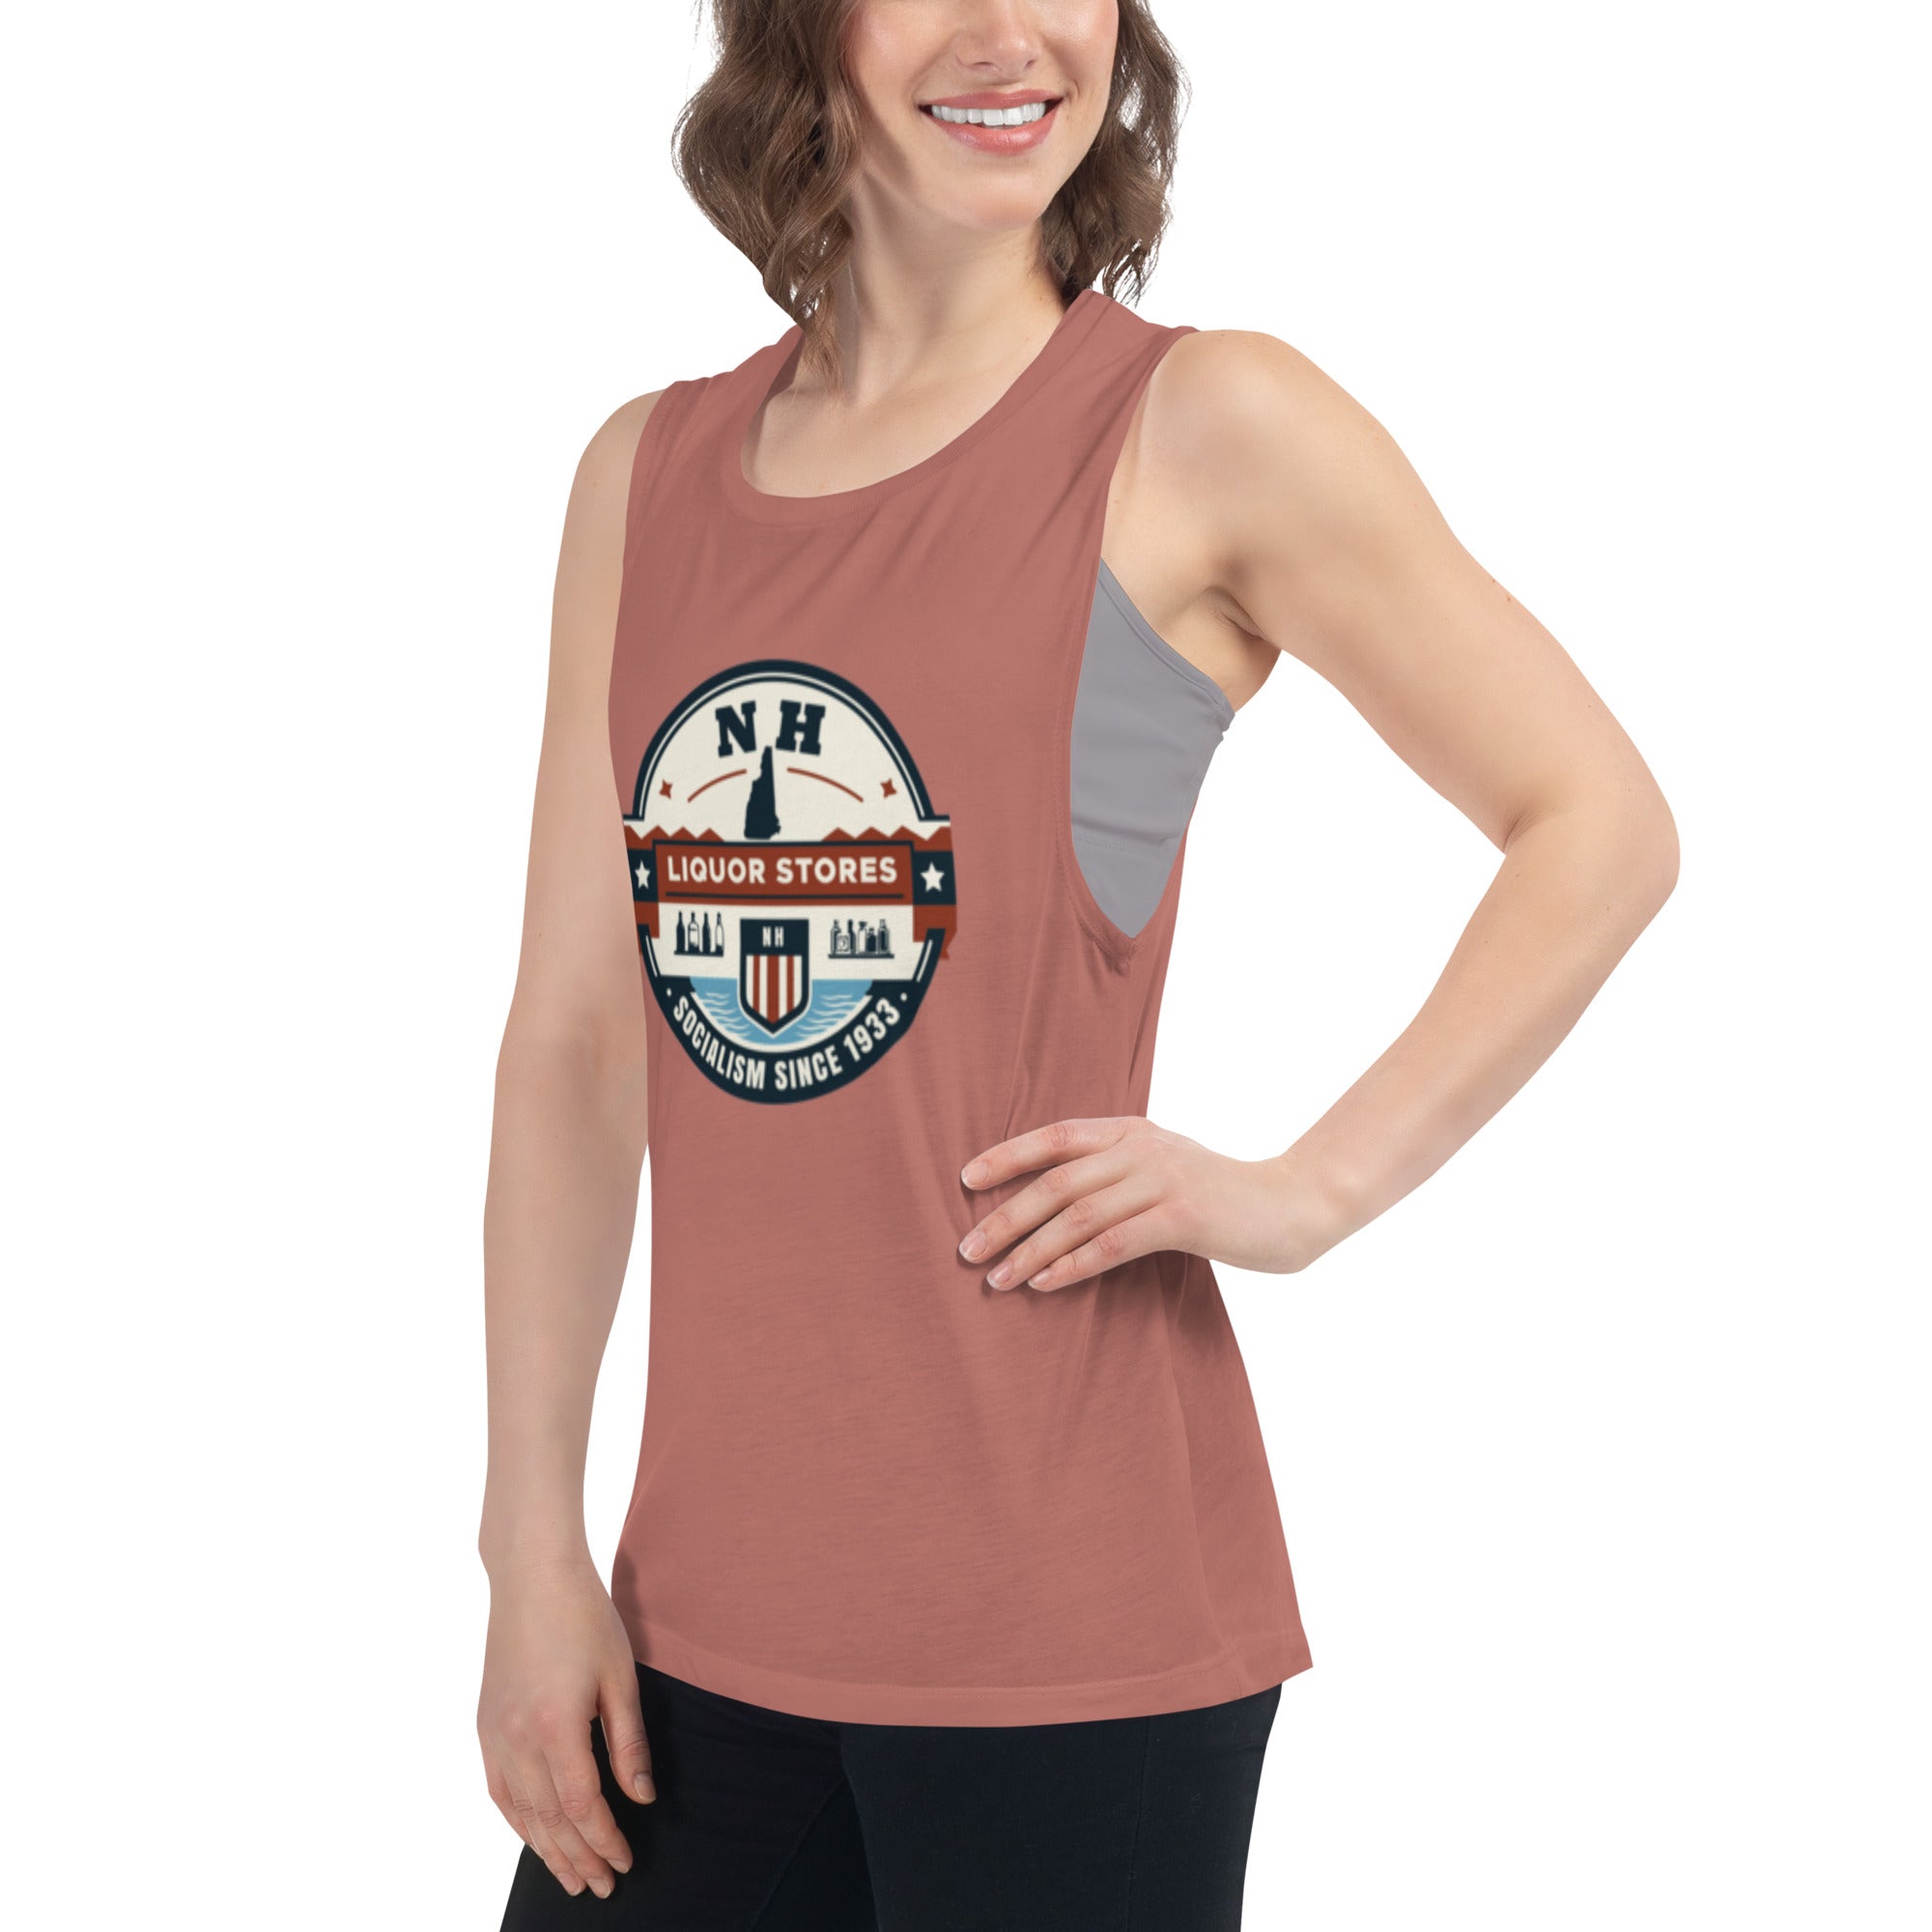 NH Liquor Stores Ladies’ Muscle Tank